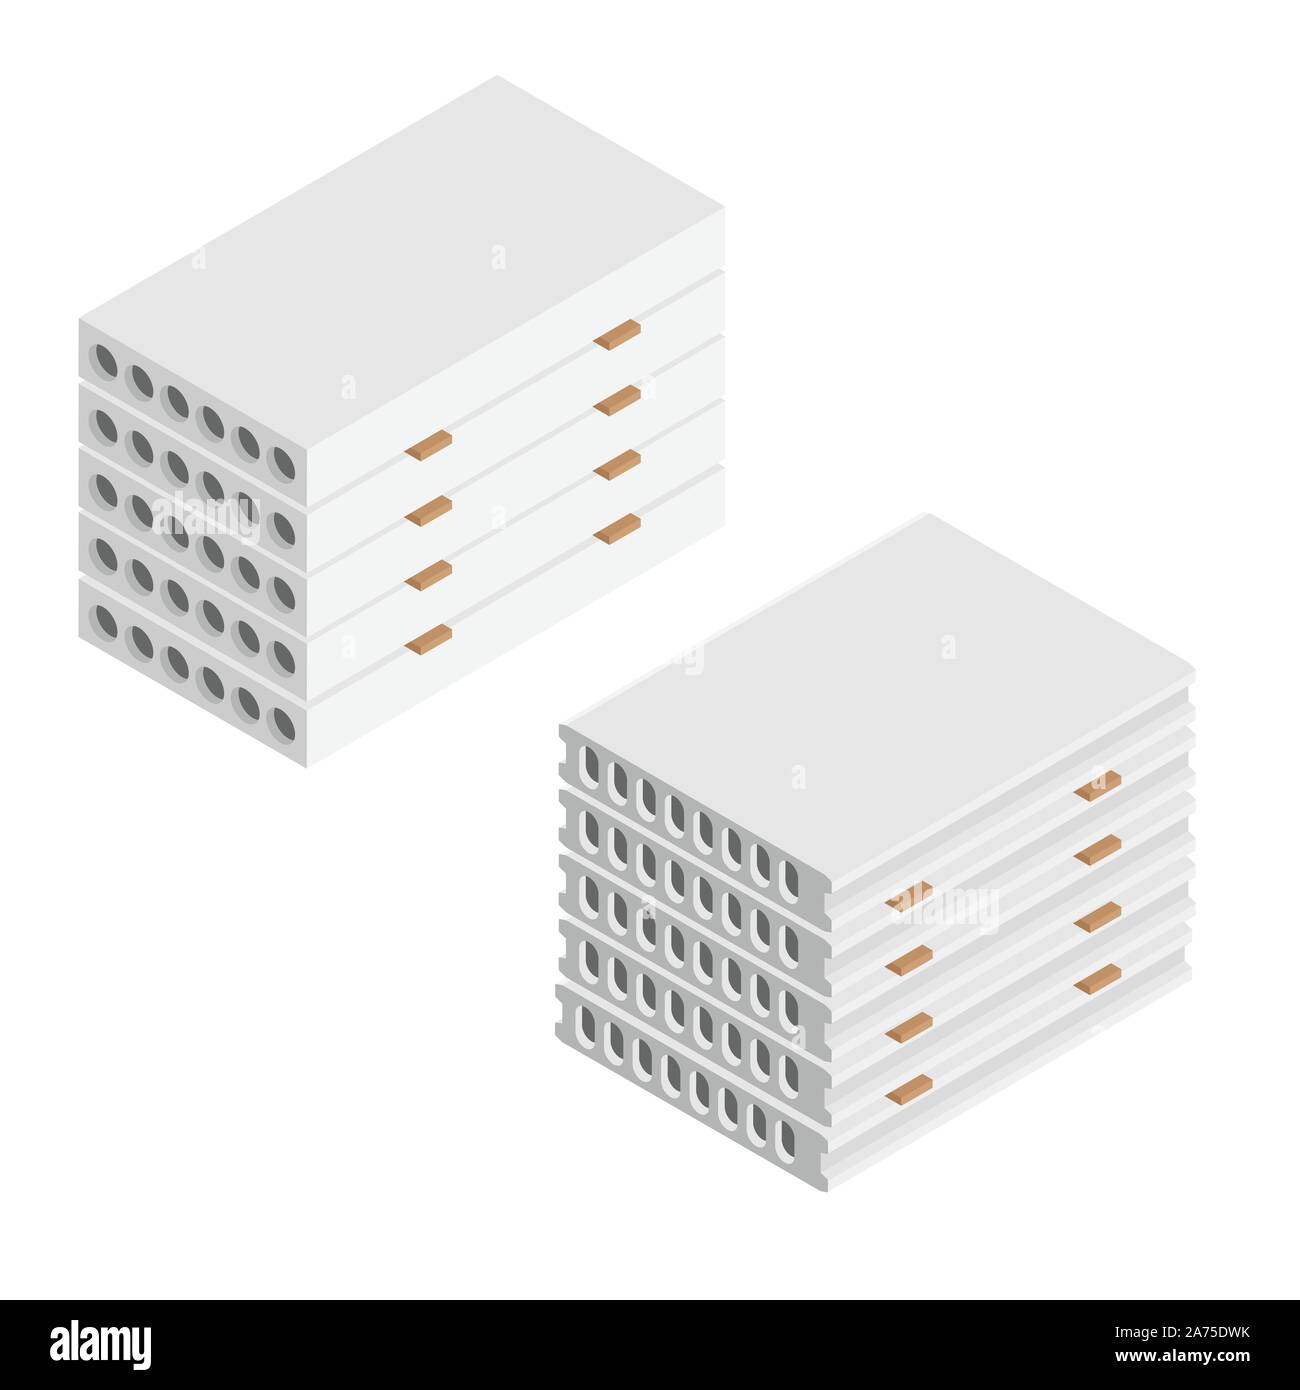 Stack of precast concrete solid blocks isometric view isolated on white background Stock Vector